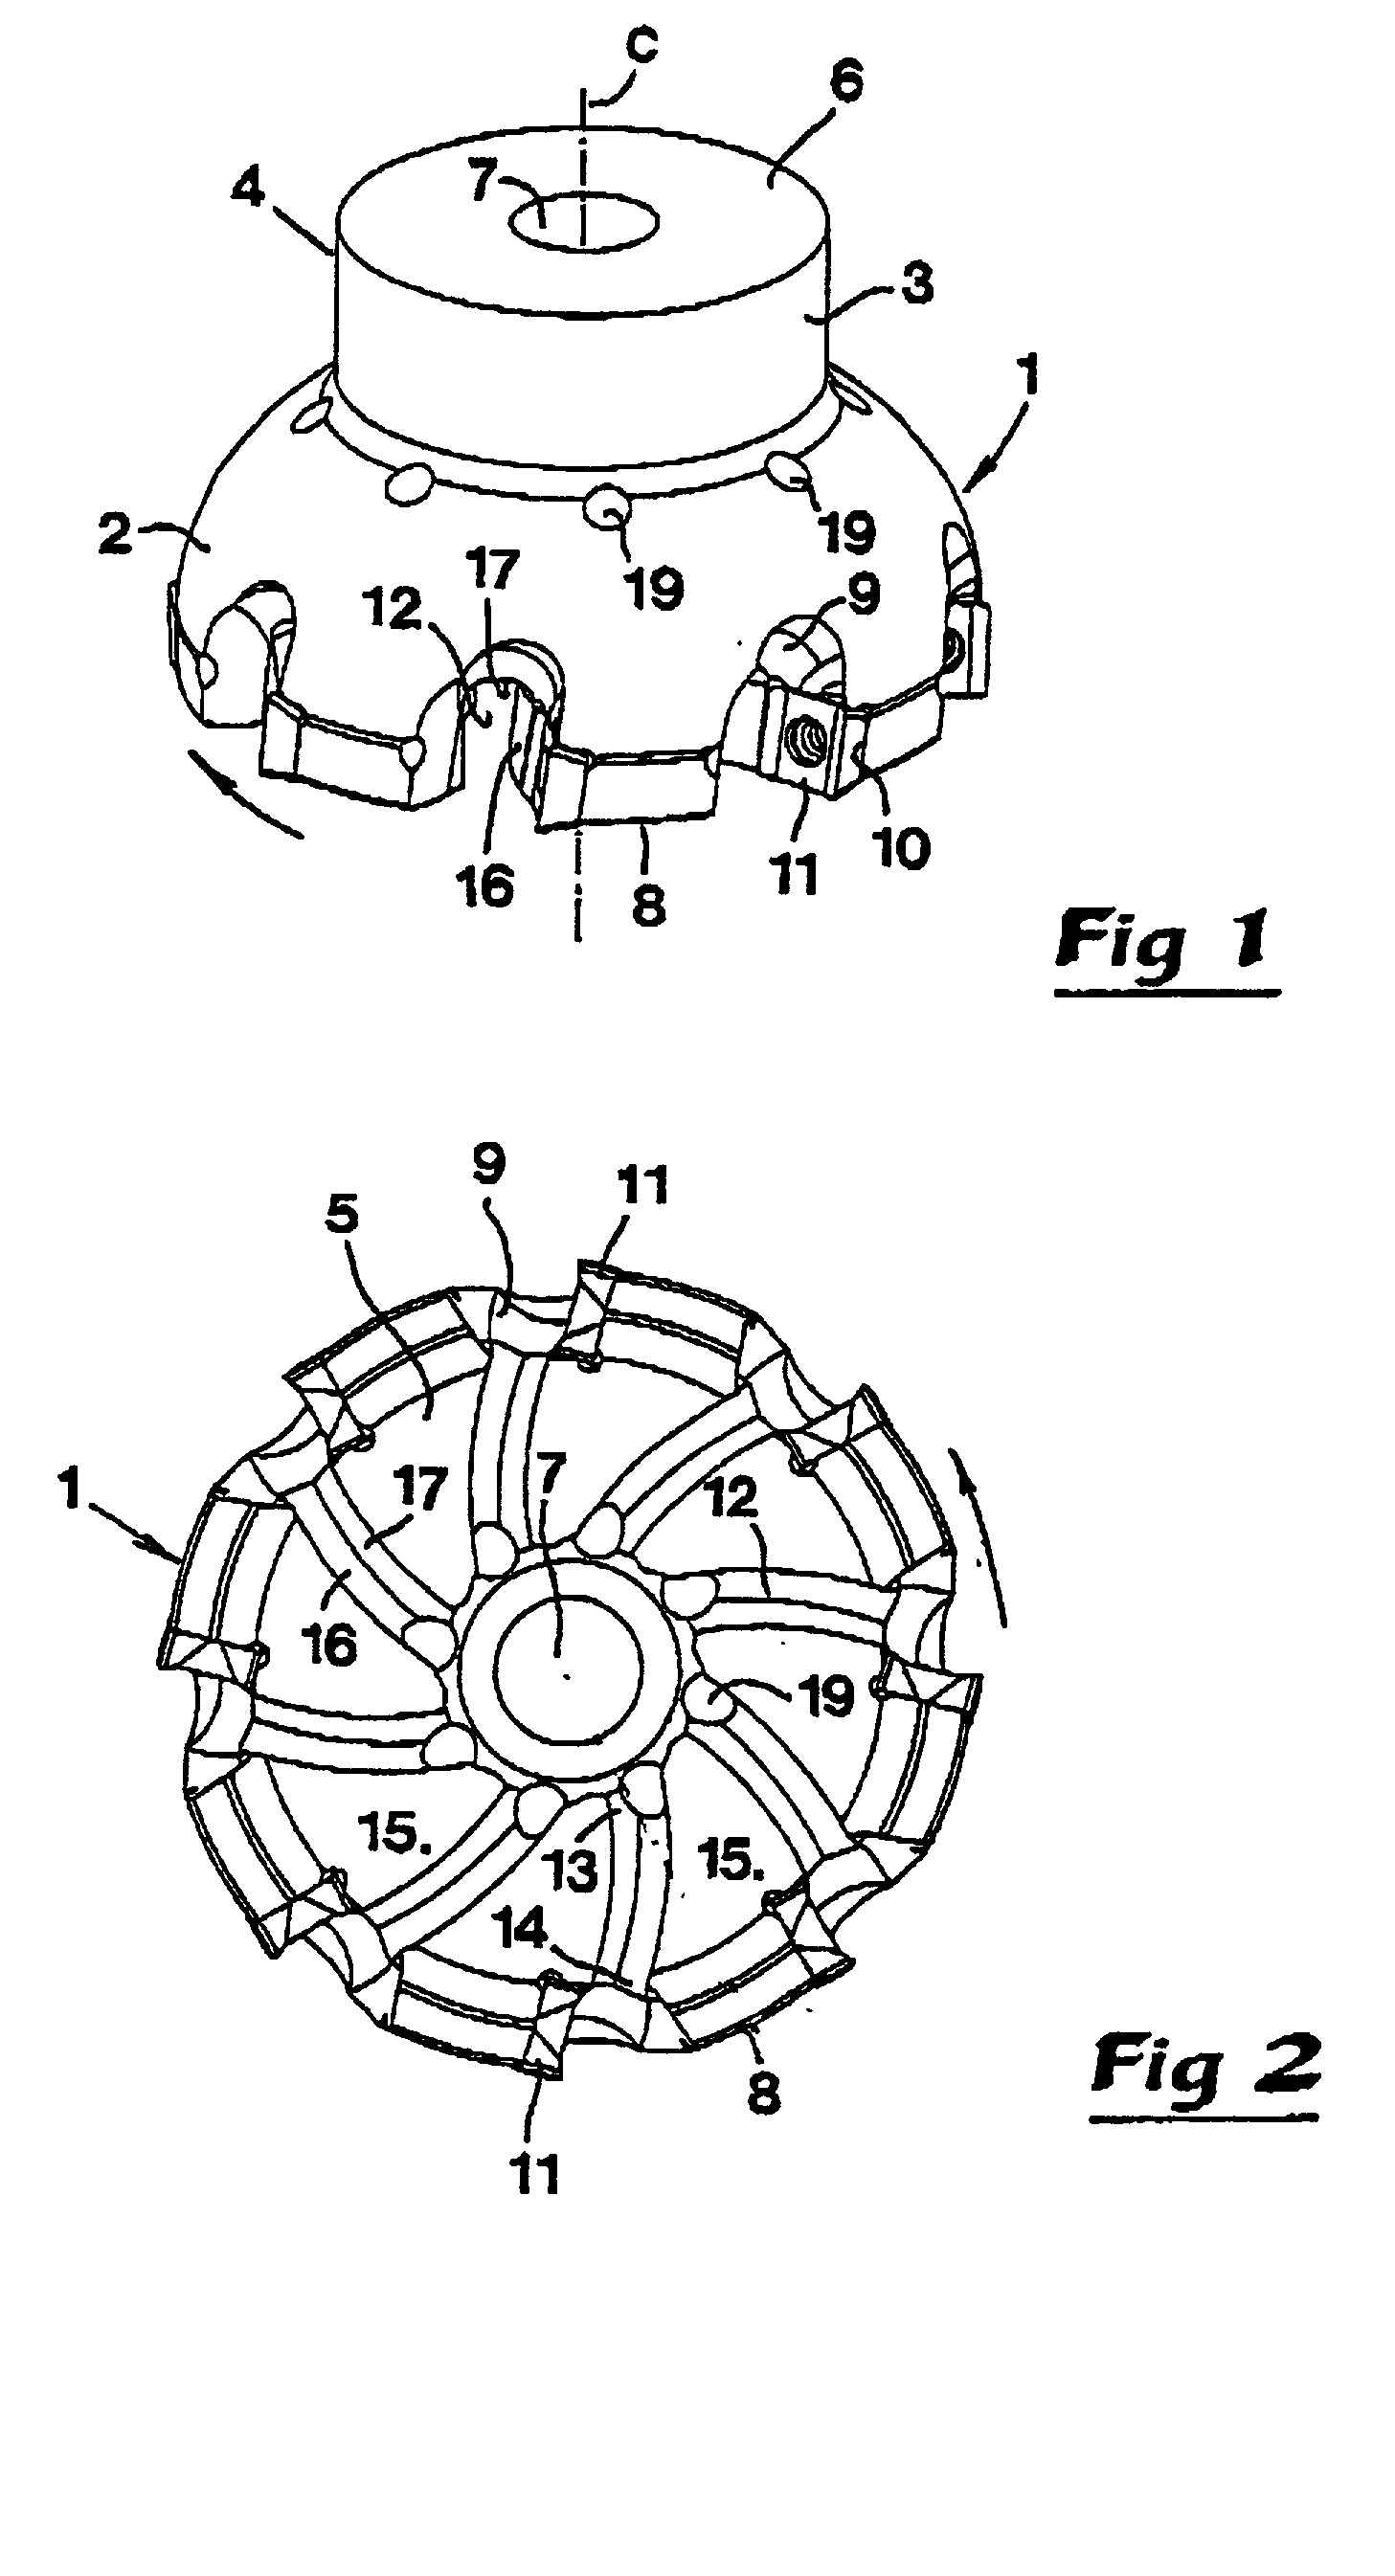 Tool for chip removing machining and having fluid-conducting branch ducts